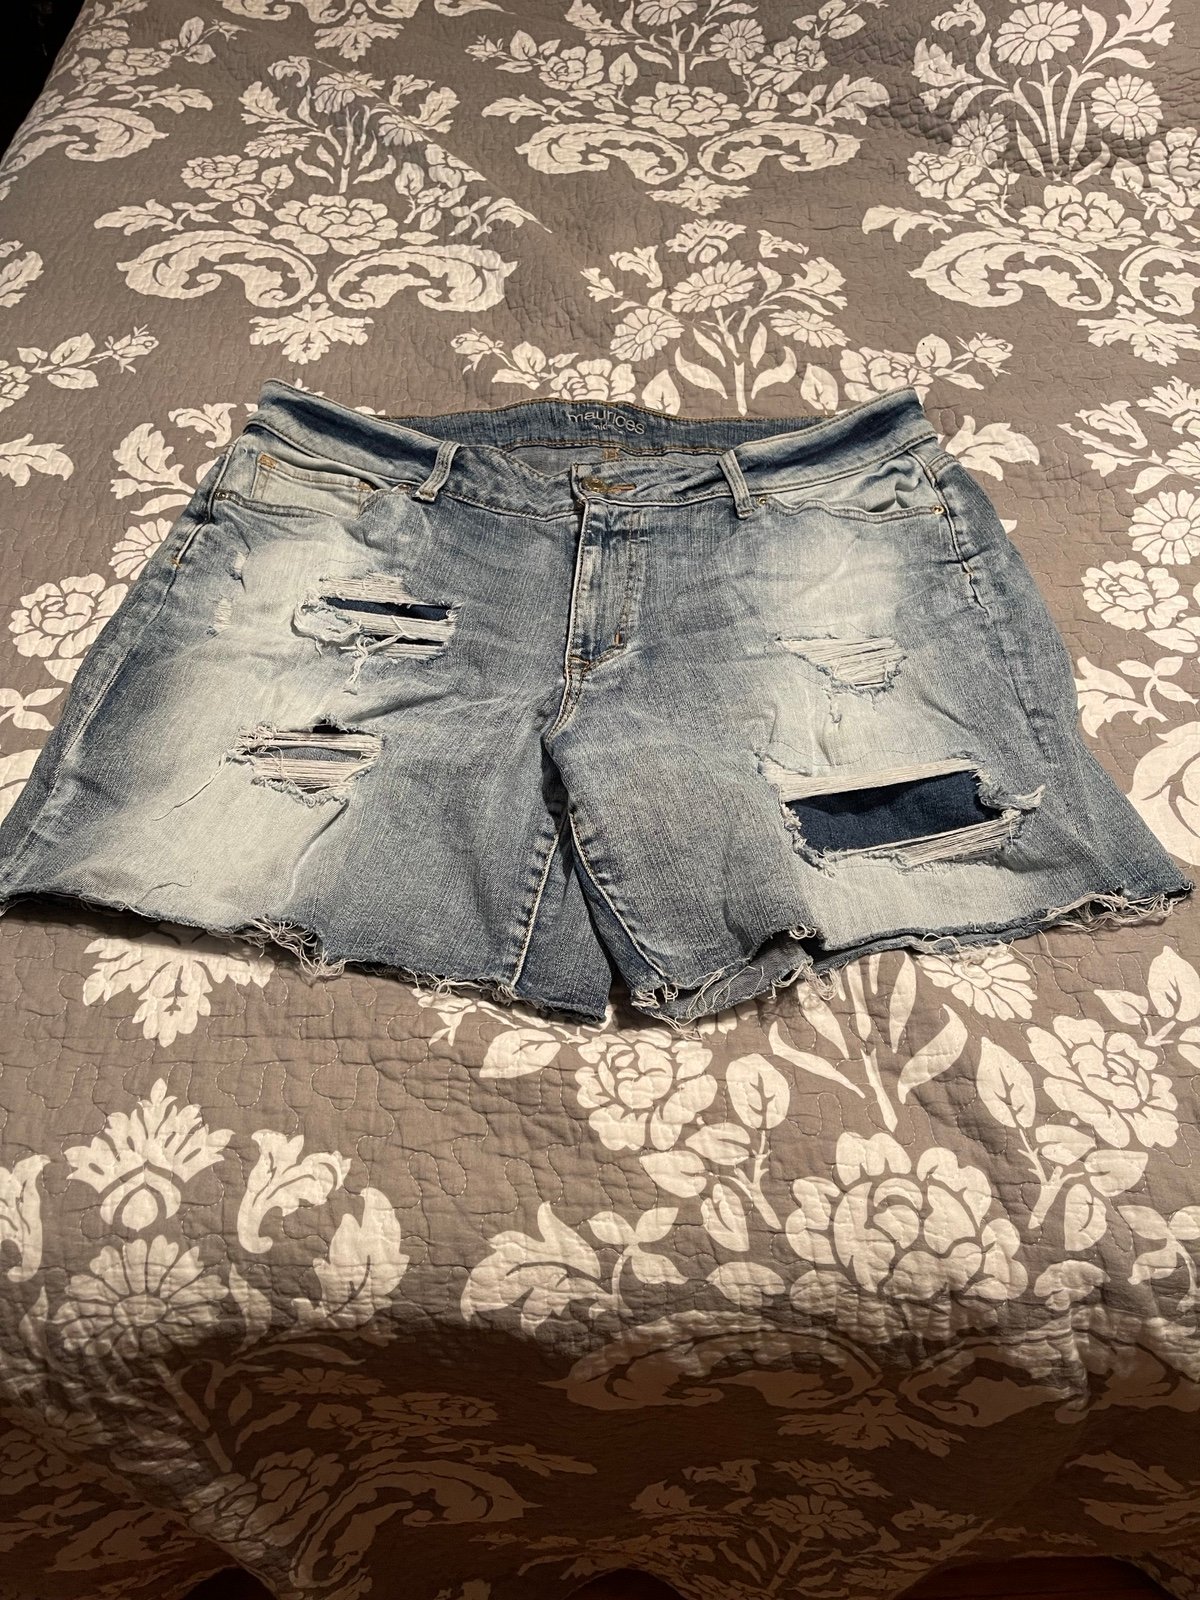 Stylish Maurices jean shorts IPm9uV4uS all for you